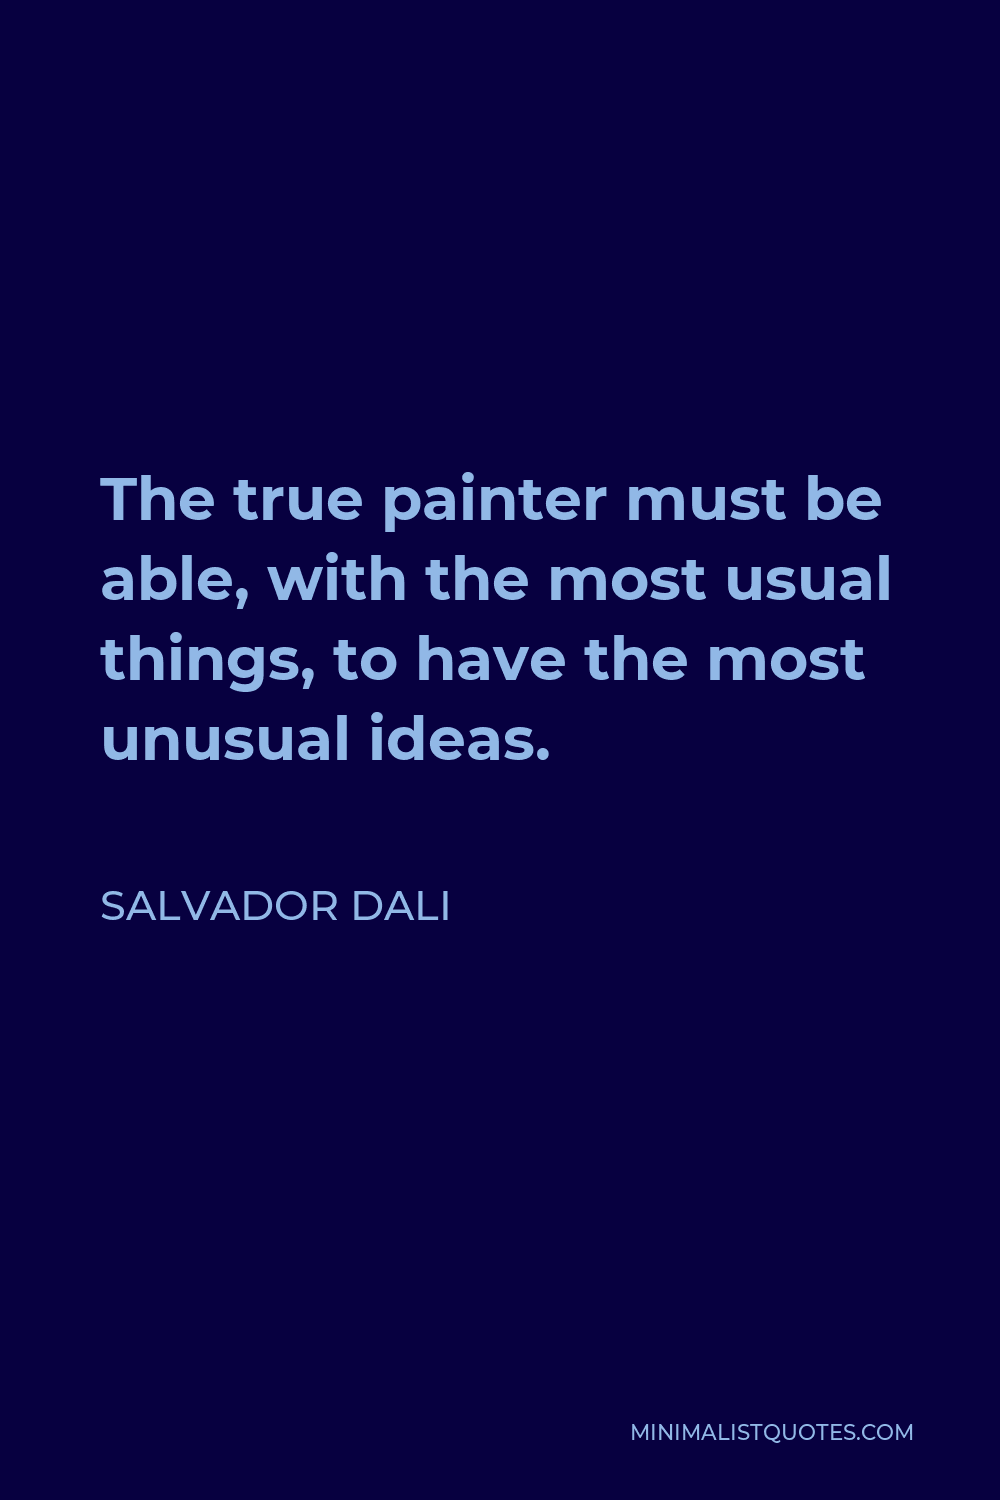 Salvador Dali Quote - The true painter must be able, with the most usual things, to have the most unusual ideas.